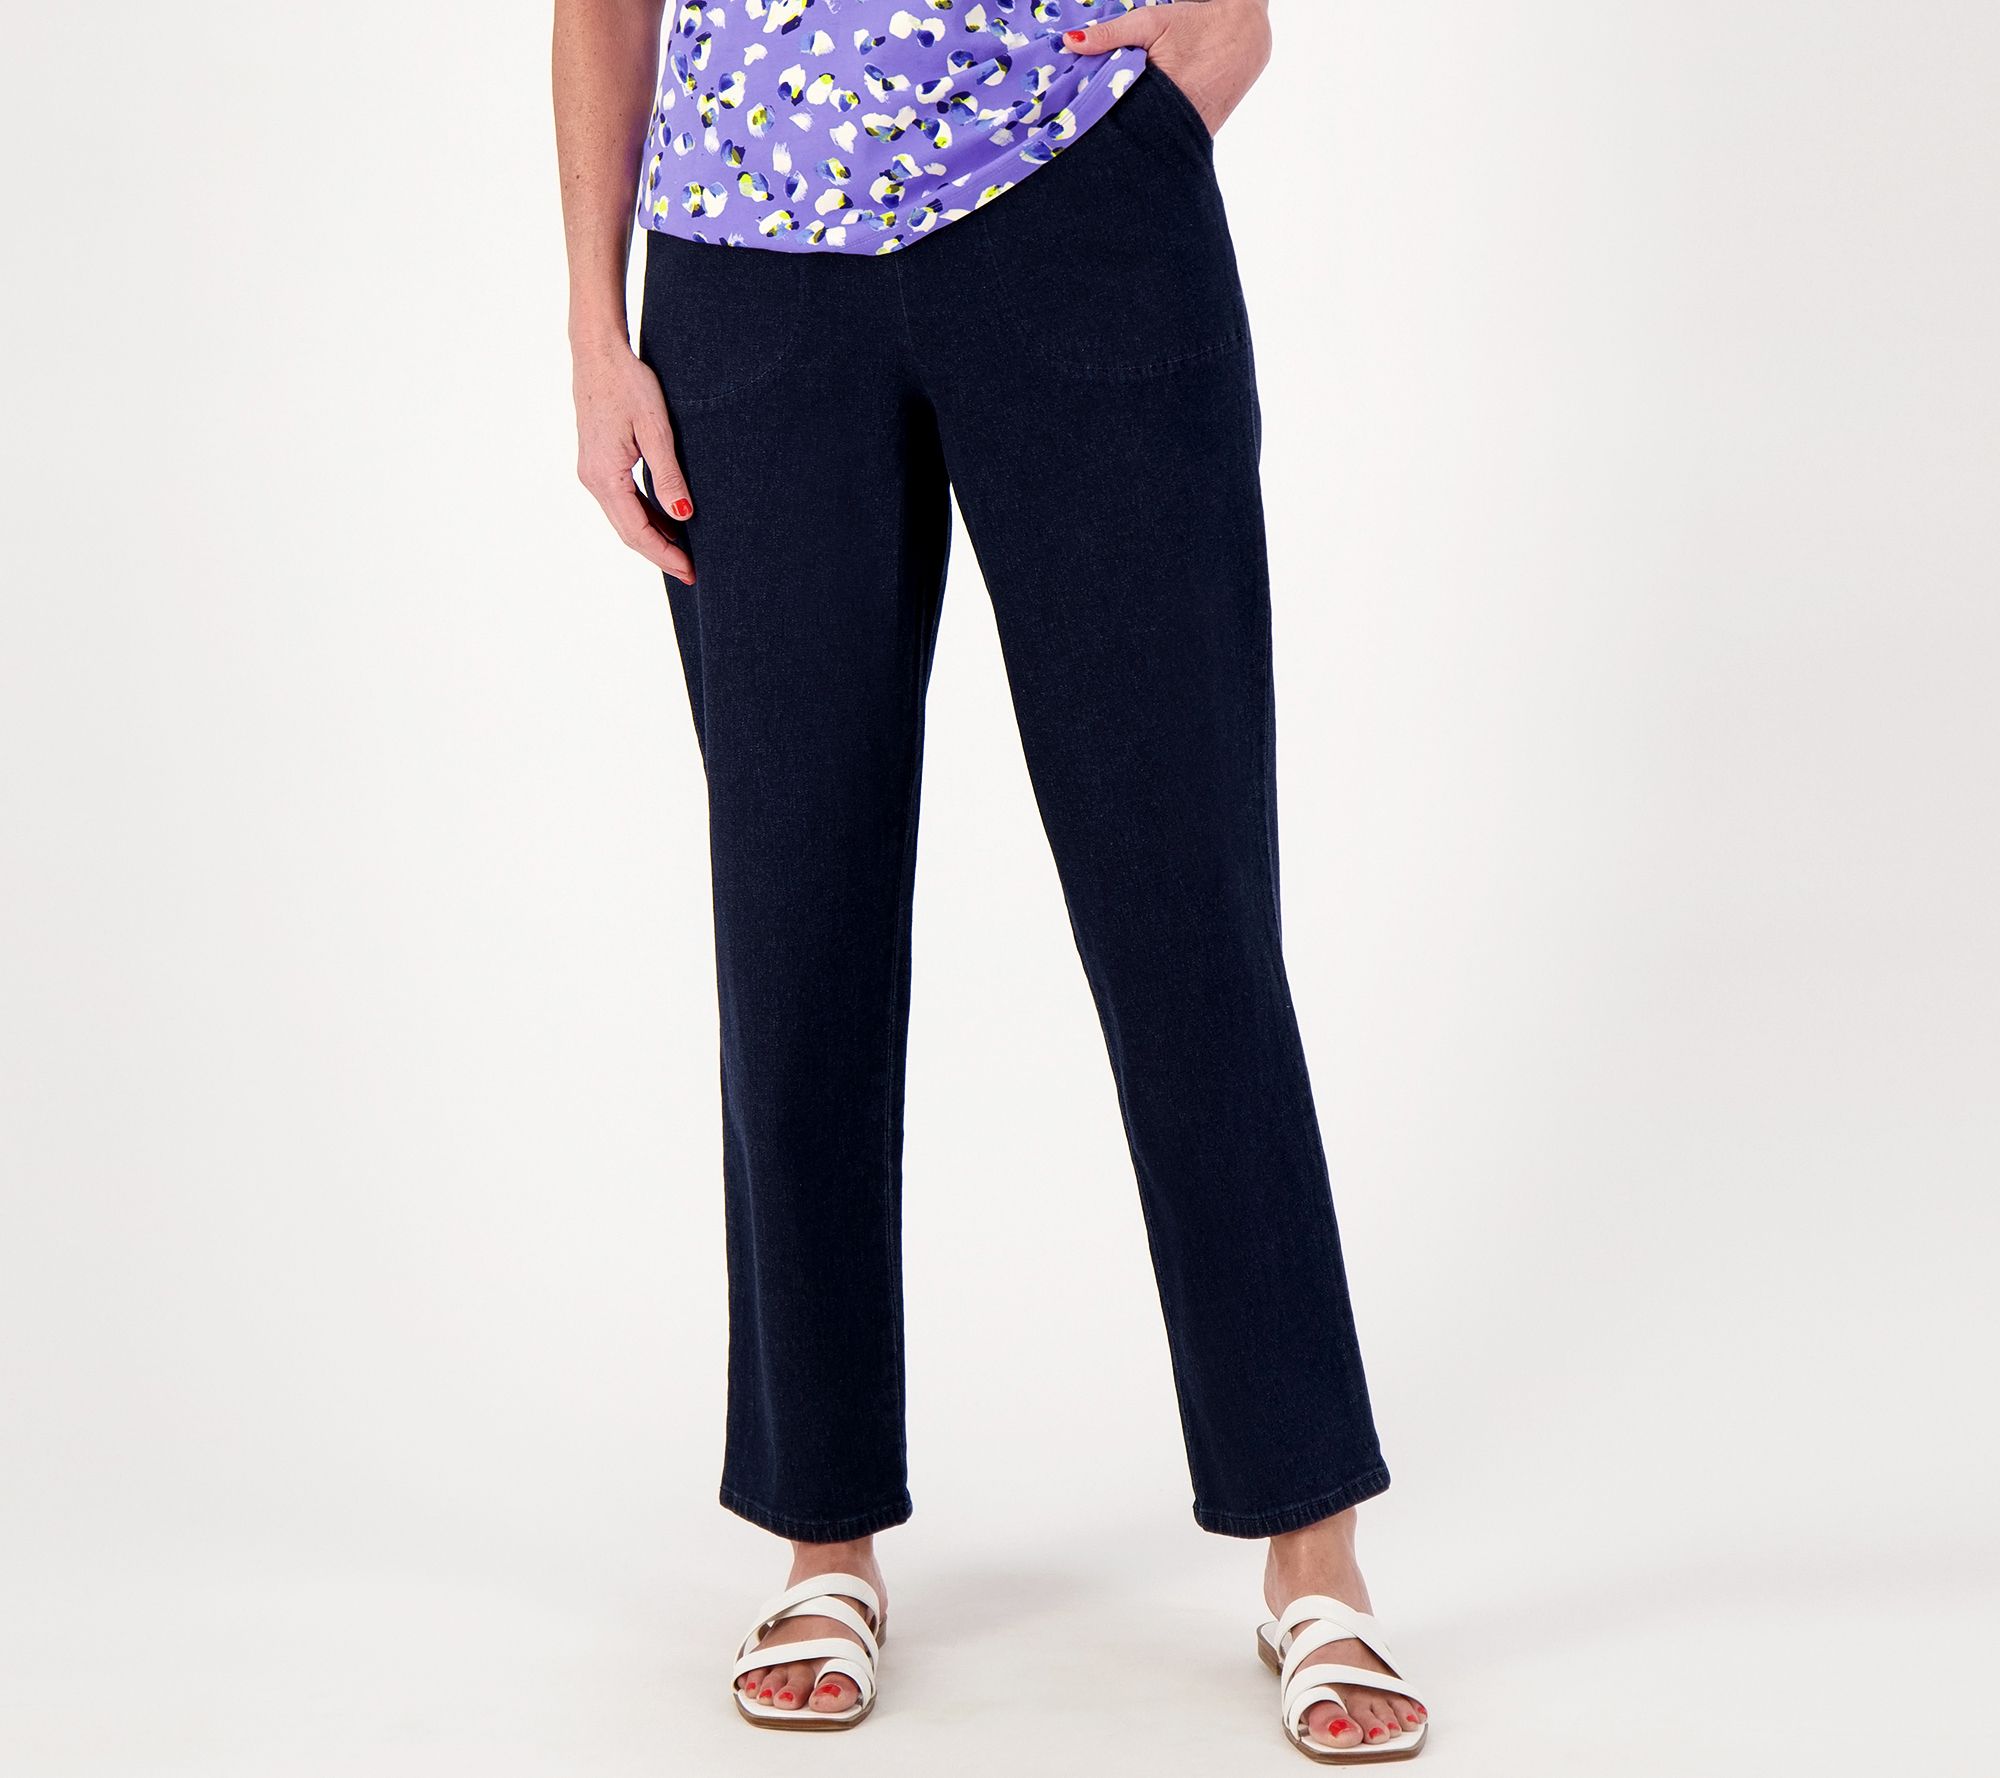 Denim & Co. Active Printed or Solid Duo Stretch Tall Pant w/ Pocket